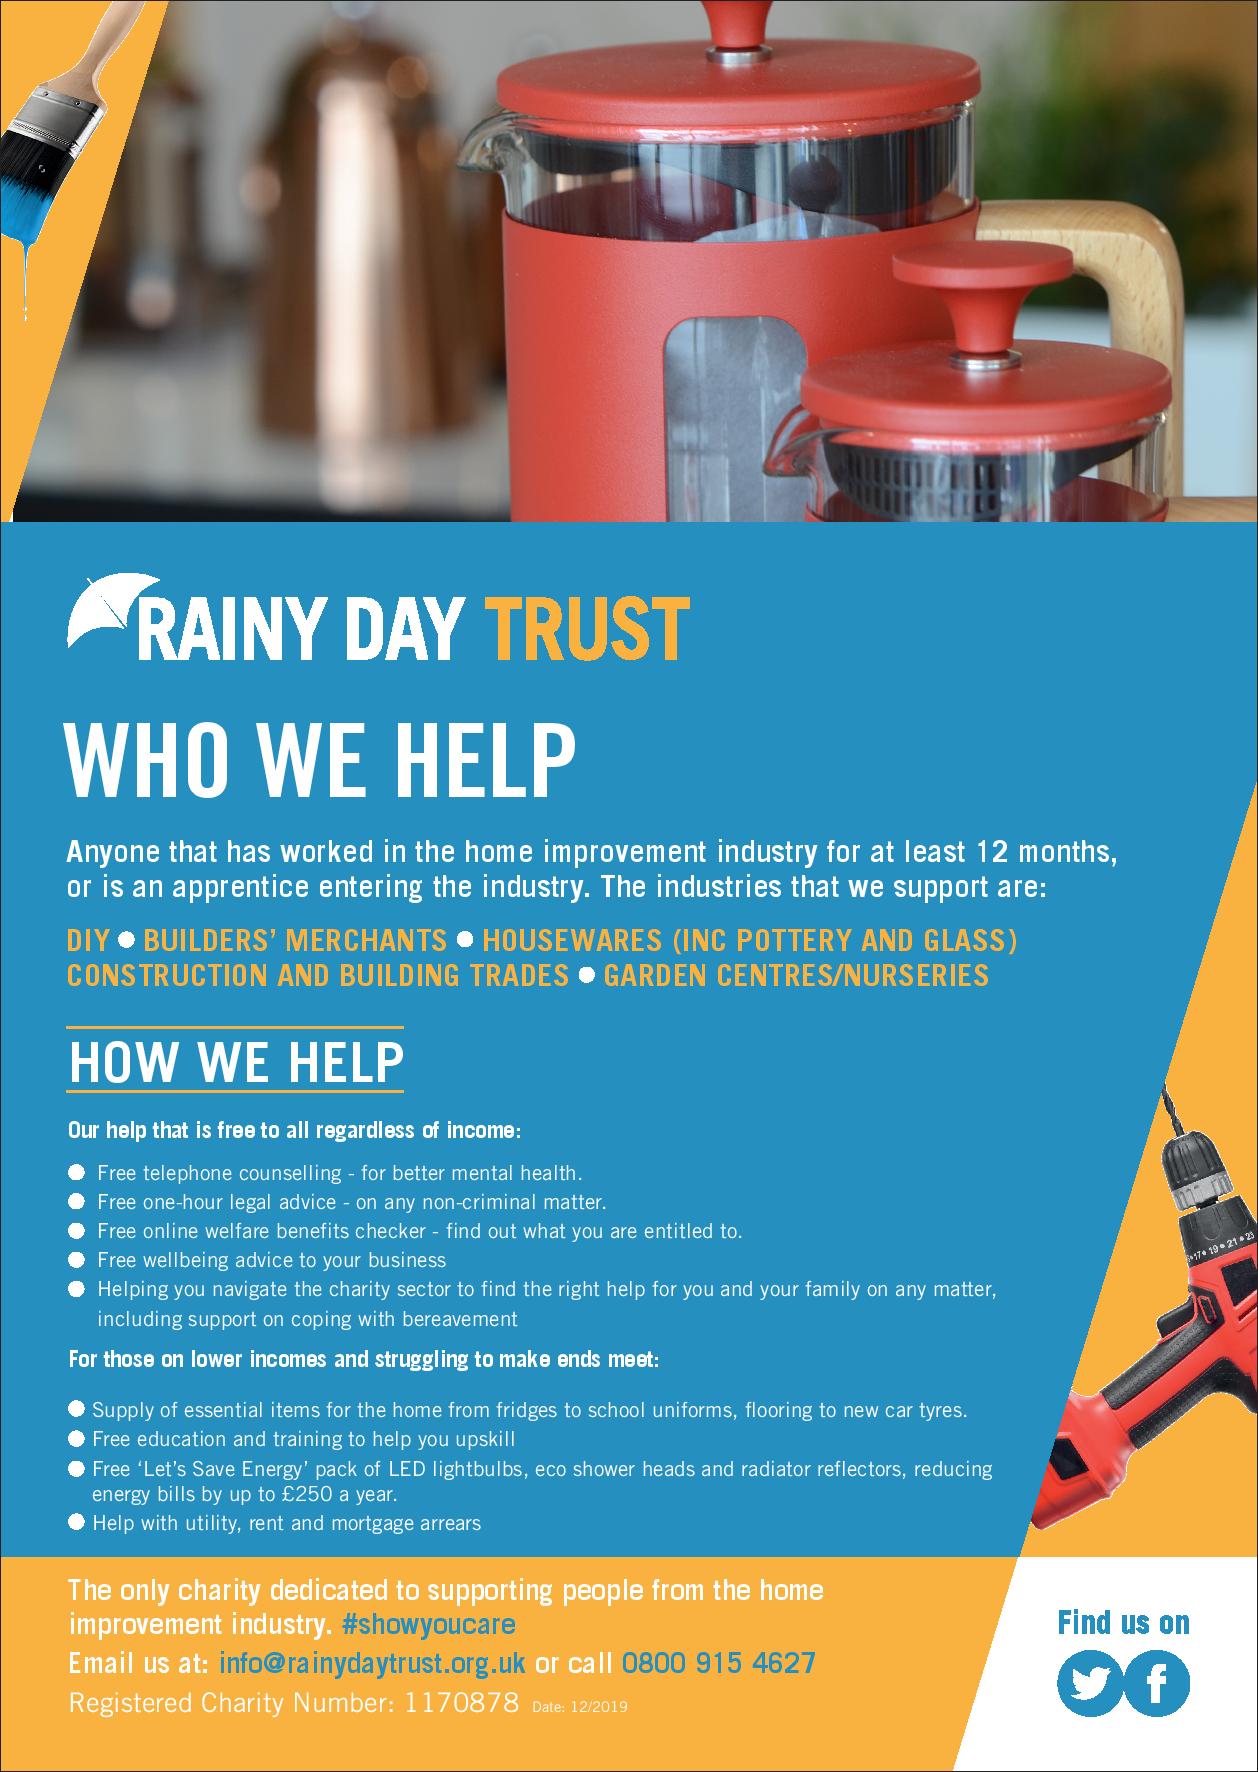 With all attention focused on the General Election, the Rainy Day Trust warns it is easy to forget that a lot of people still have struggles to contend with – from mental health issues to financial worries.